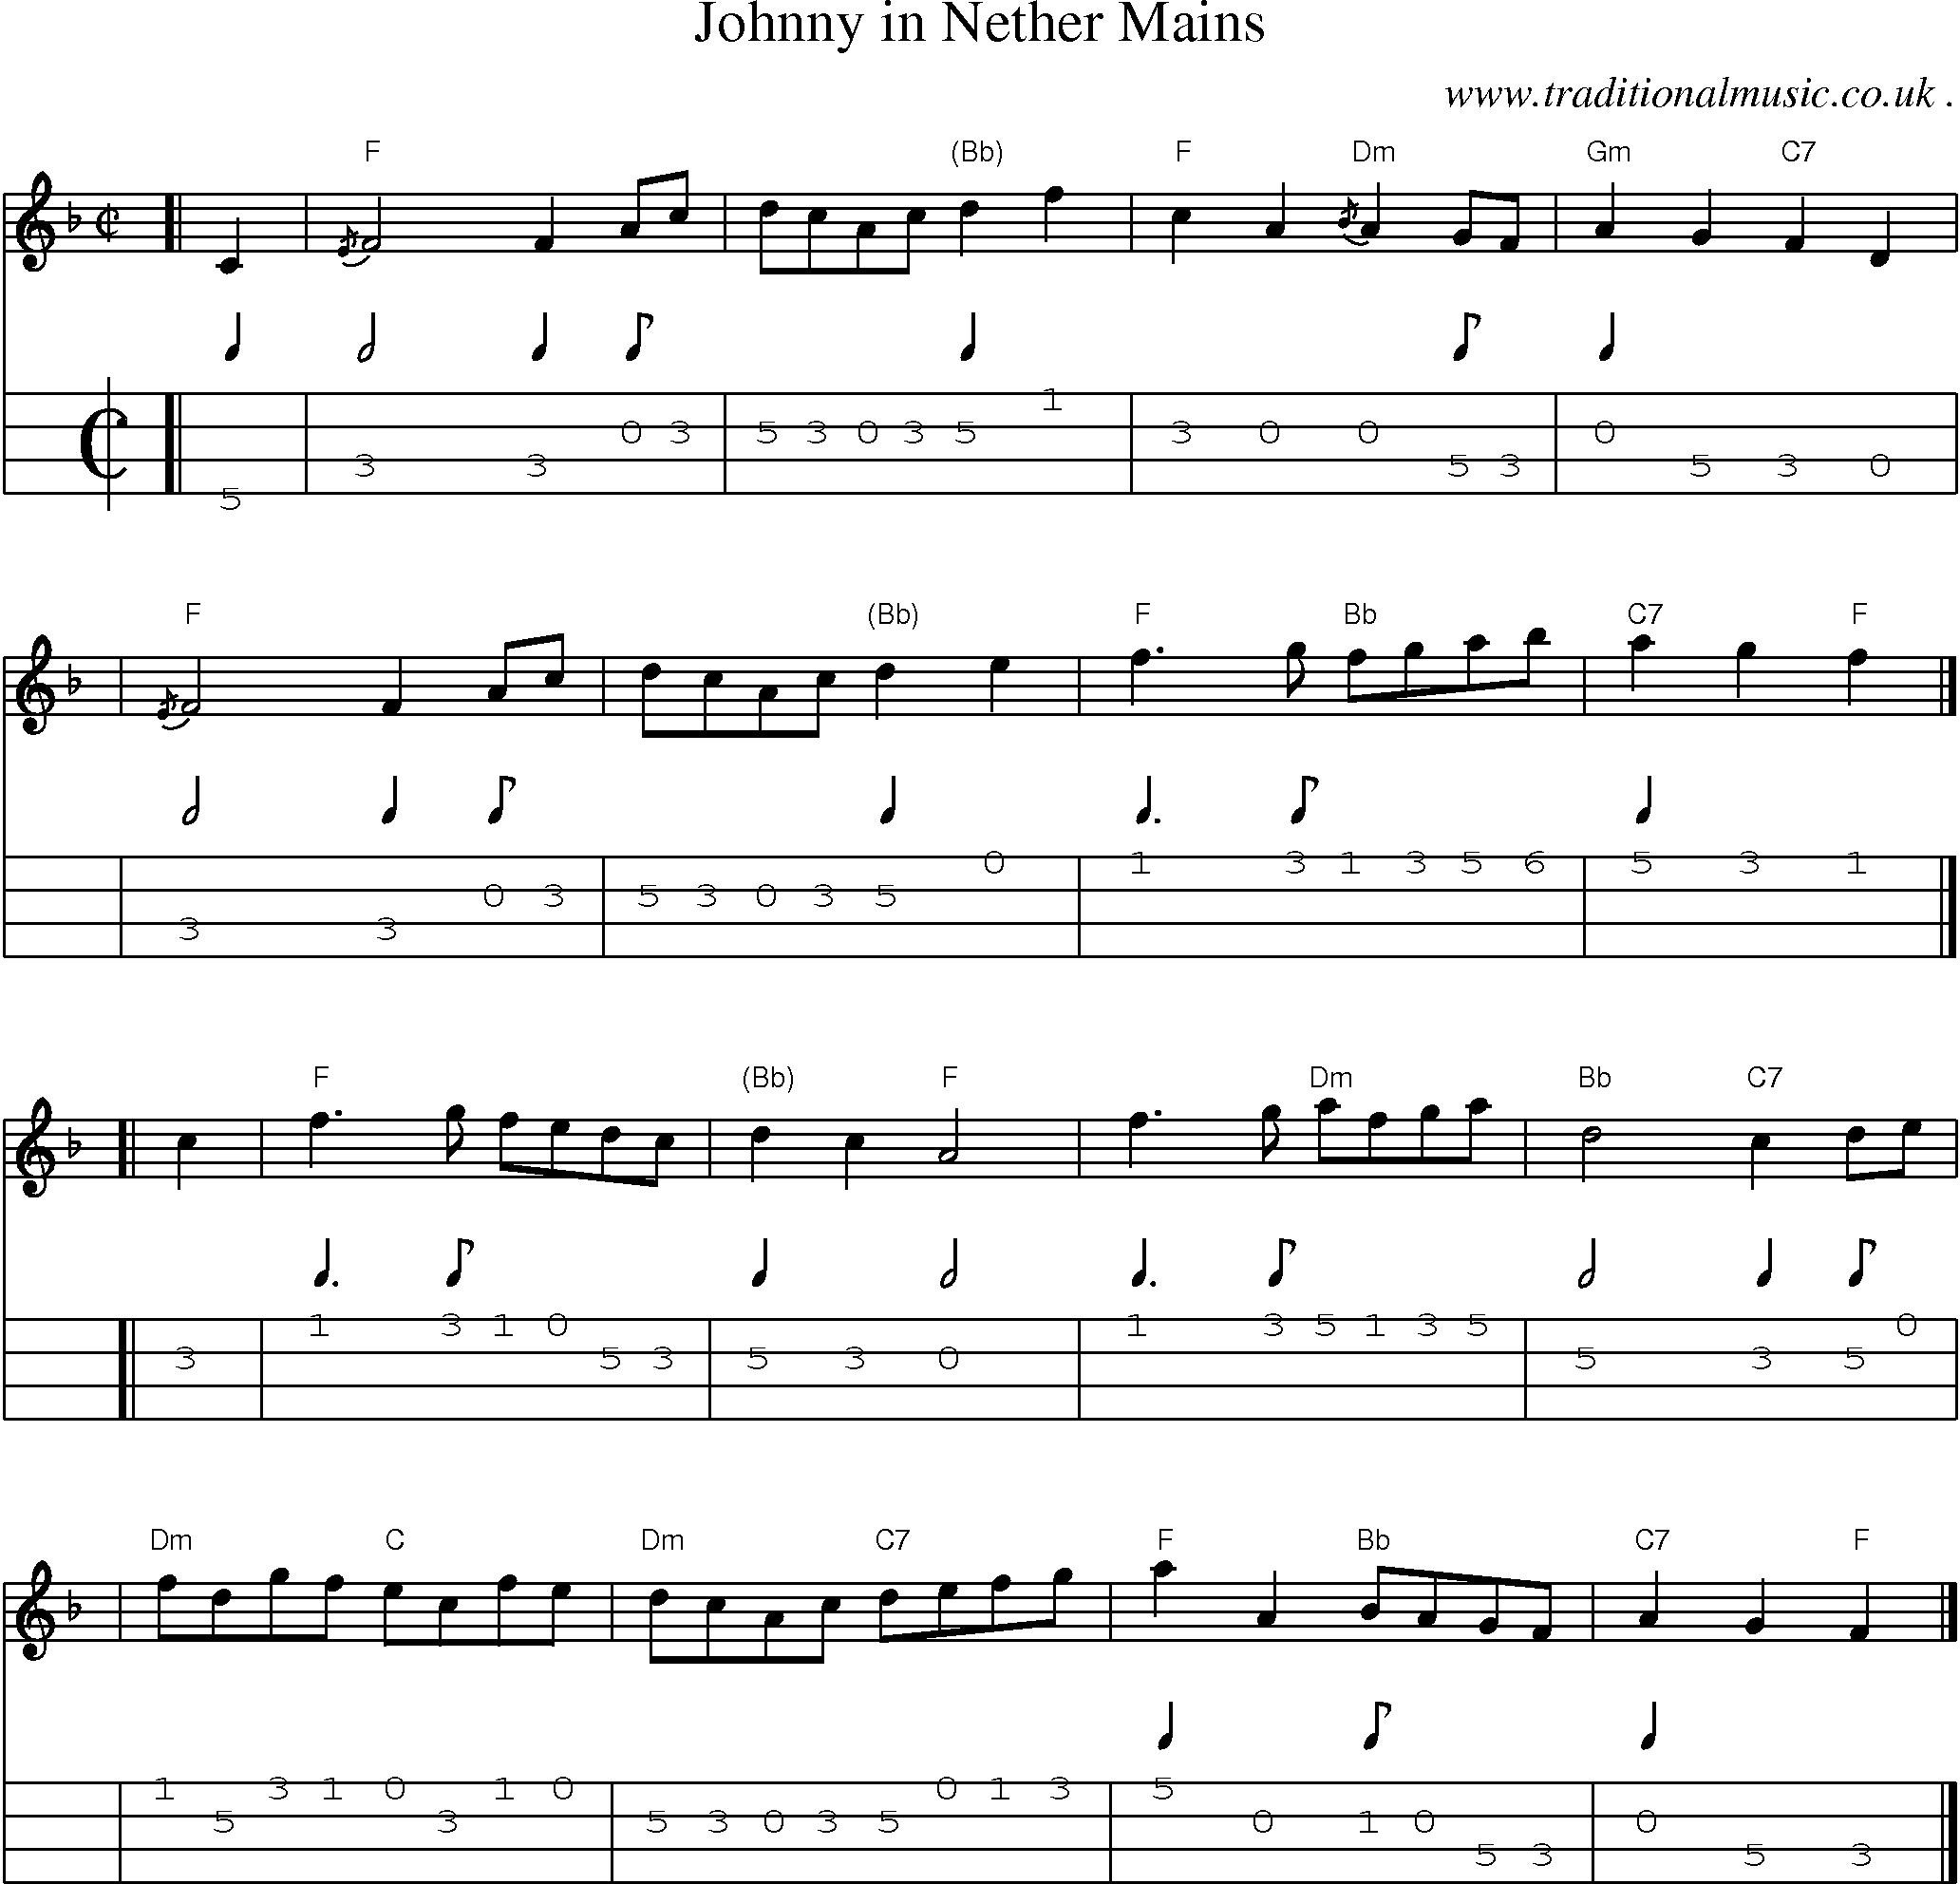 Sheet-music  score, Chords and Mandolin Tabs for Johnny In Nether Mains